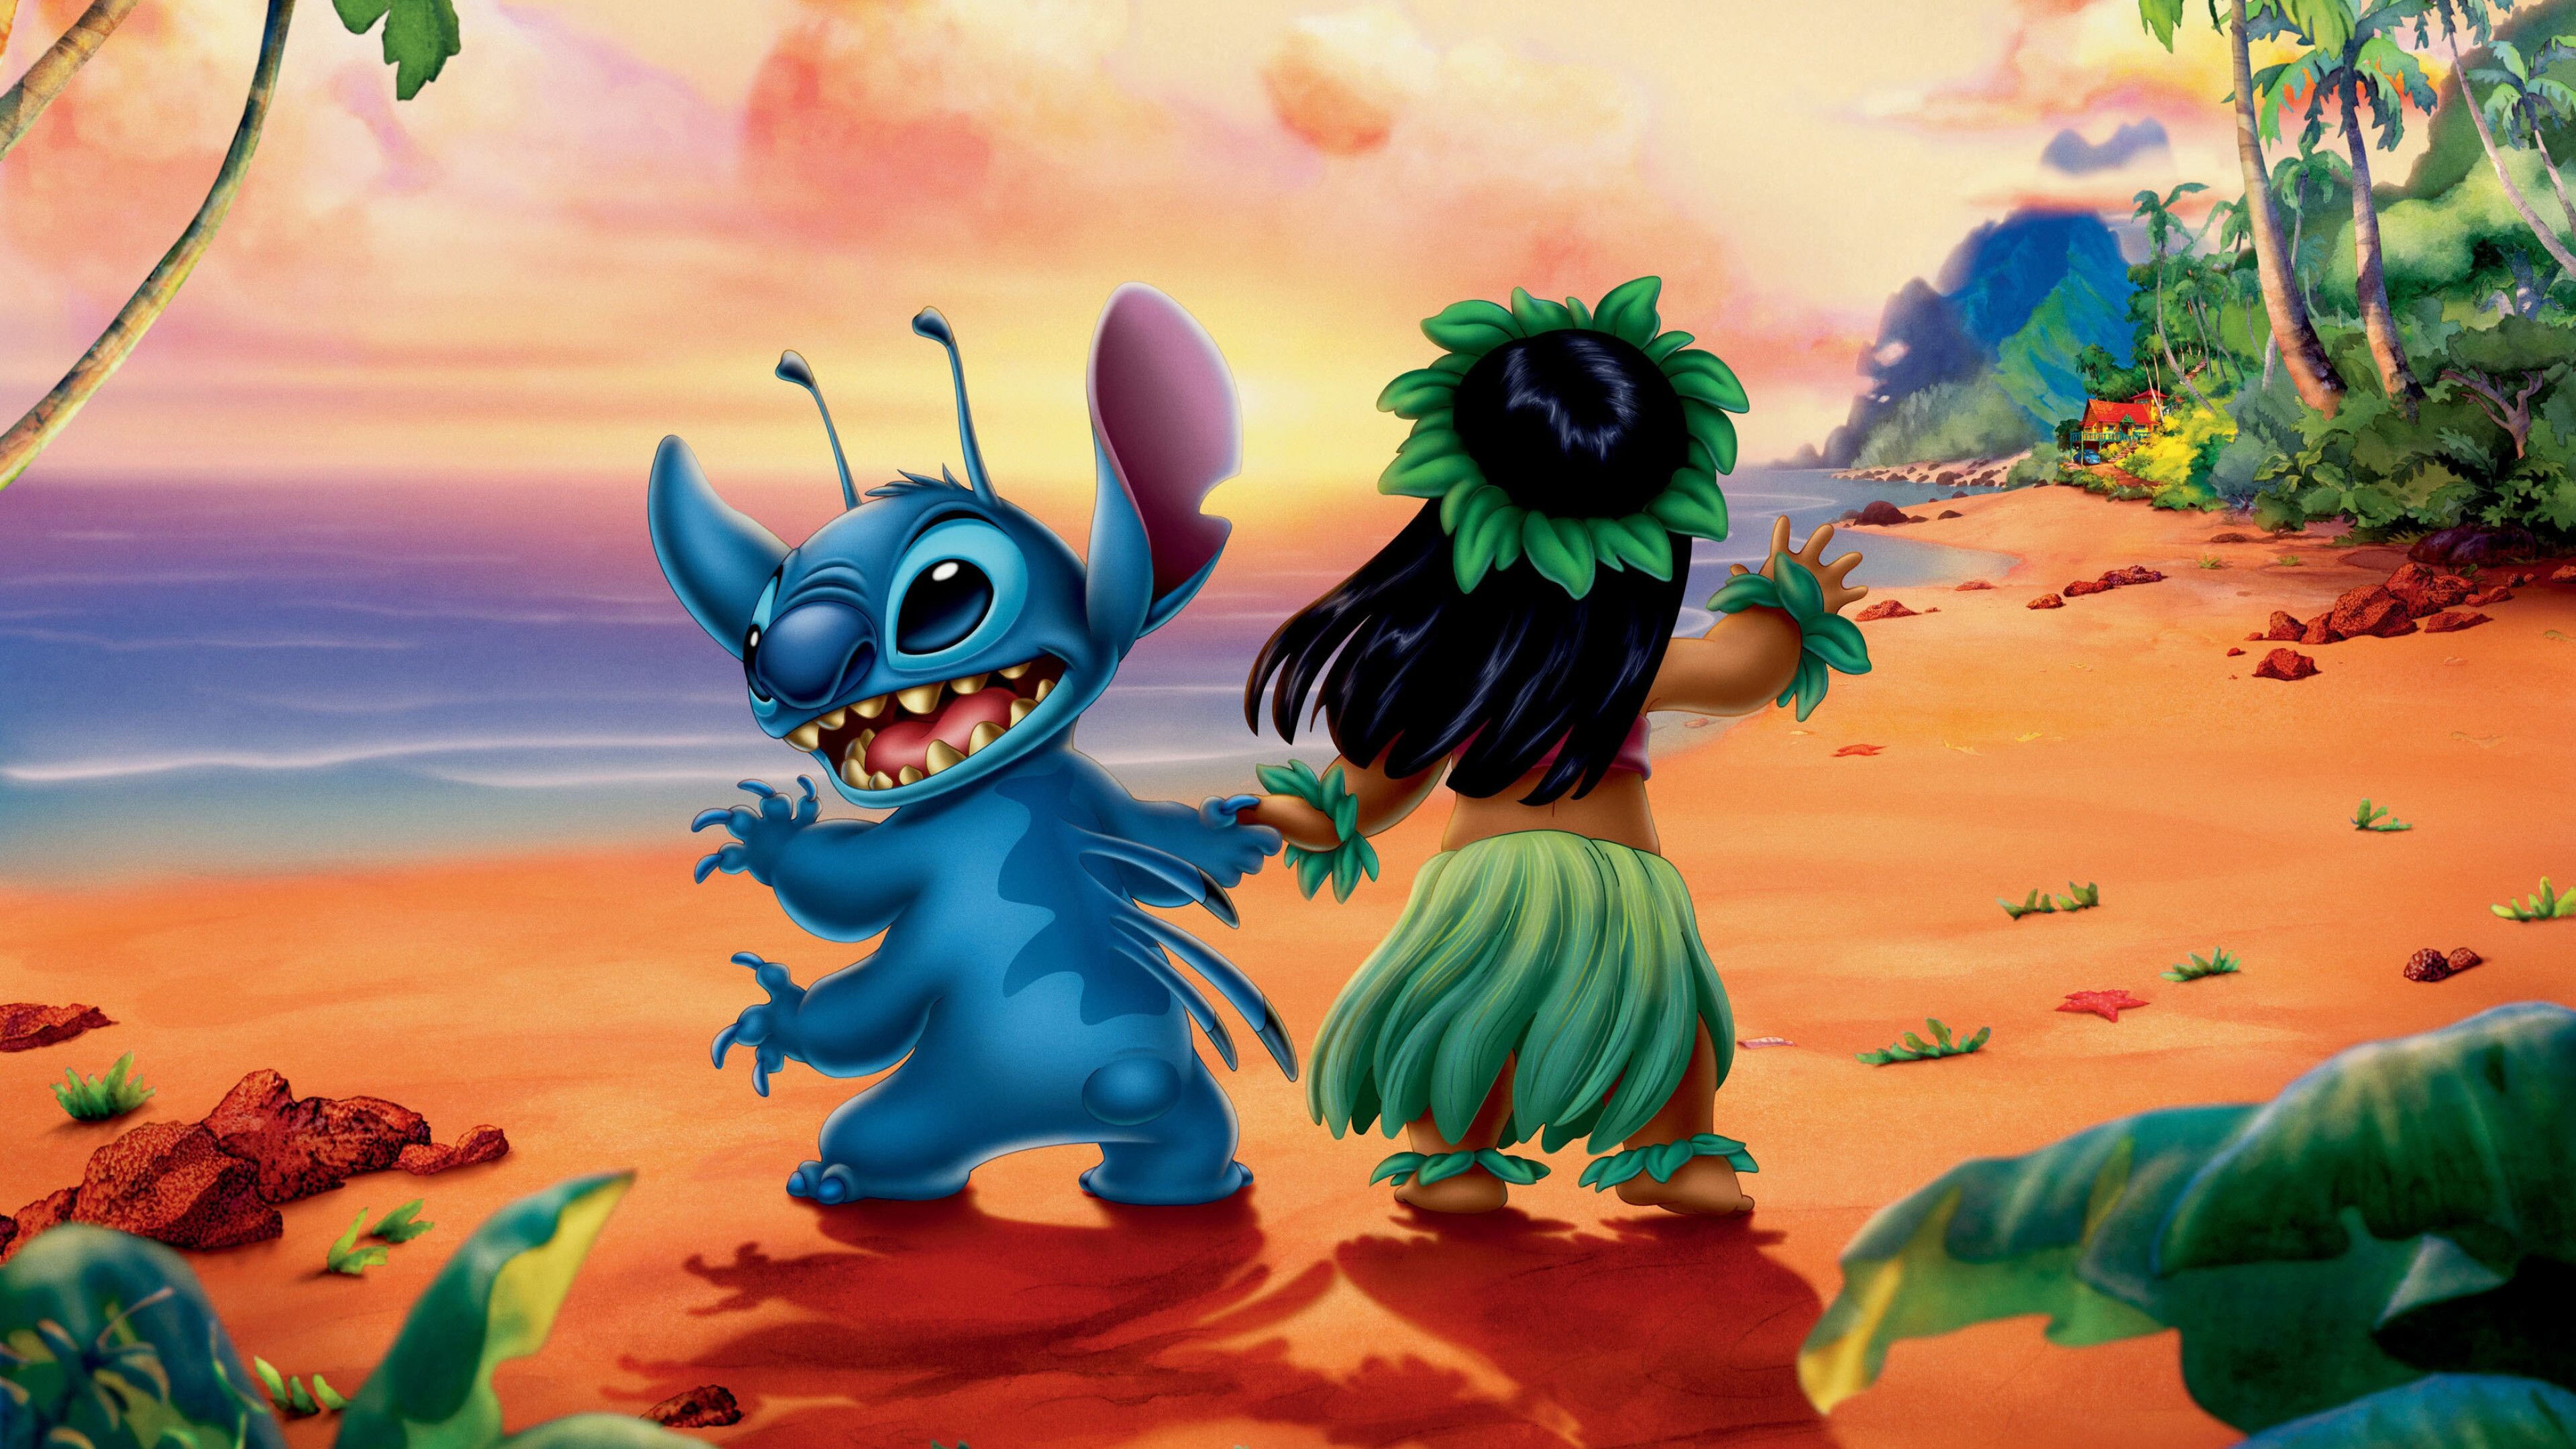 Lilo and Stitch: An American animated television series produced by Walt Disney Television Animation. 3840x2160 4K Wallpaper.